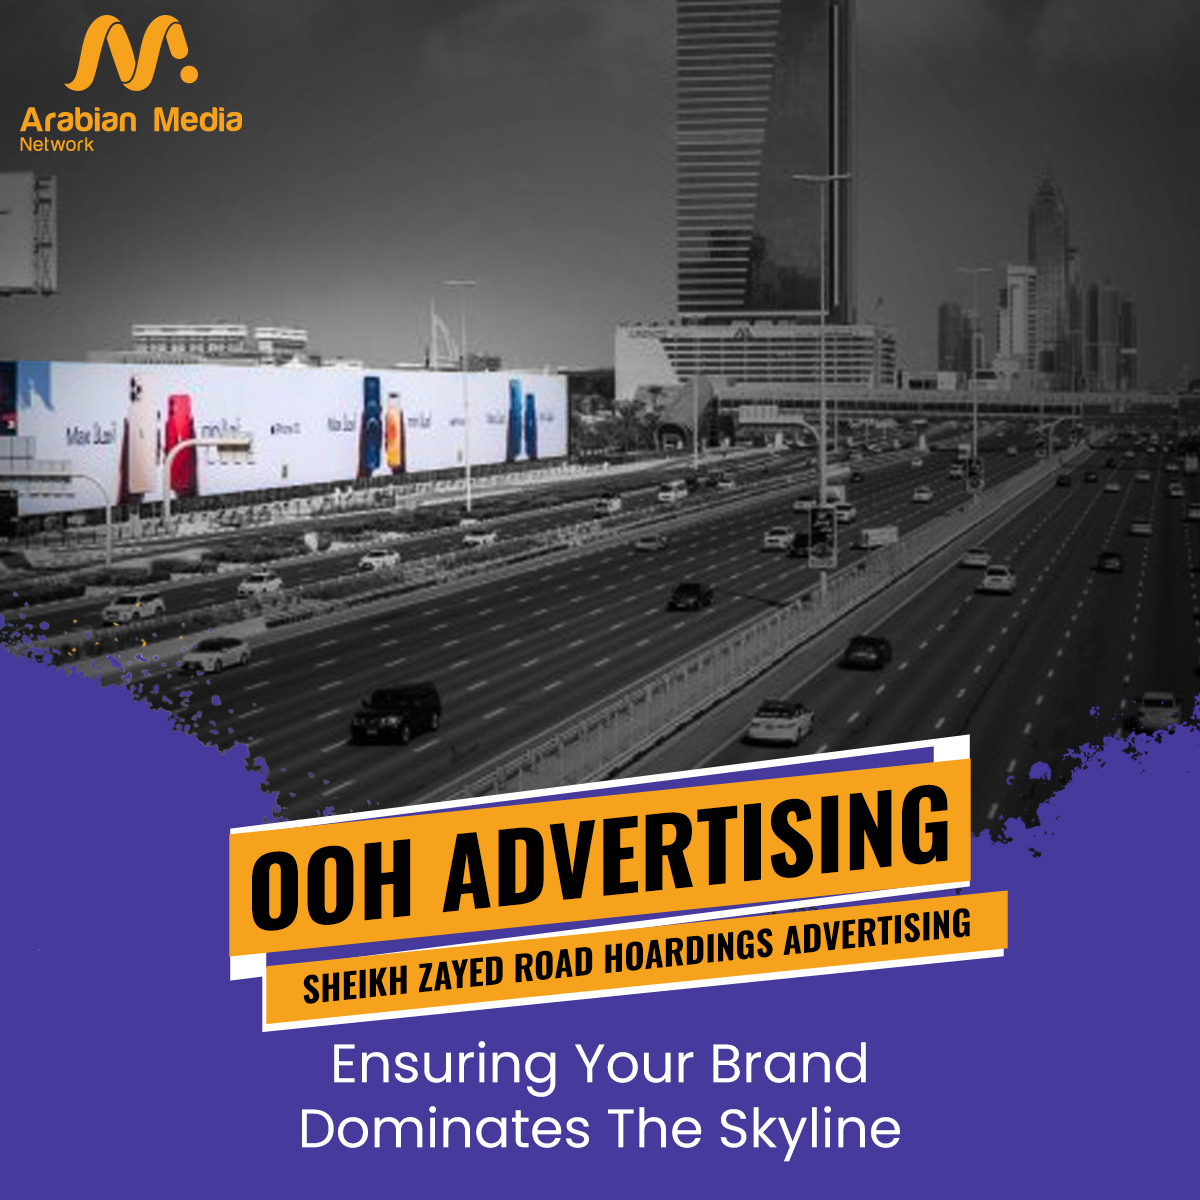 Get more brand visibility with OOH advertising solutions, guaranteeing that your brand stand out prominently and capturing the attention of passersby
#AMN #ArabianMediaNetwork #UAE #Marketing #Dubai #Advertising #OutdoorAdvertising #OOH #oohads #oohadvertising #outofhomeadverting